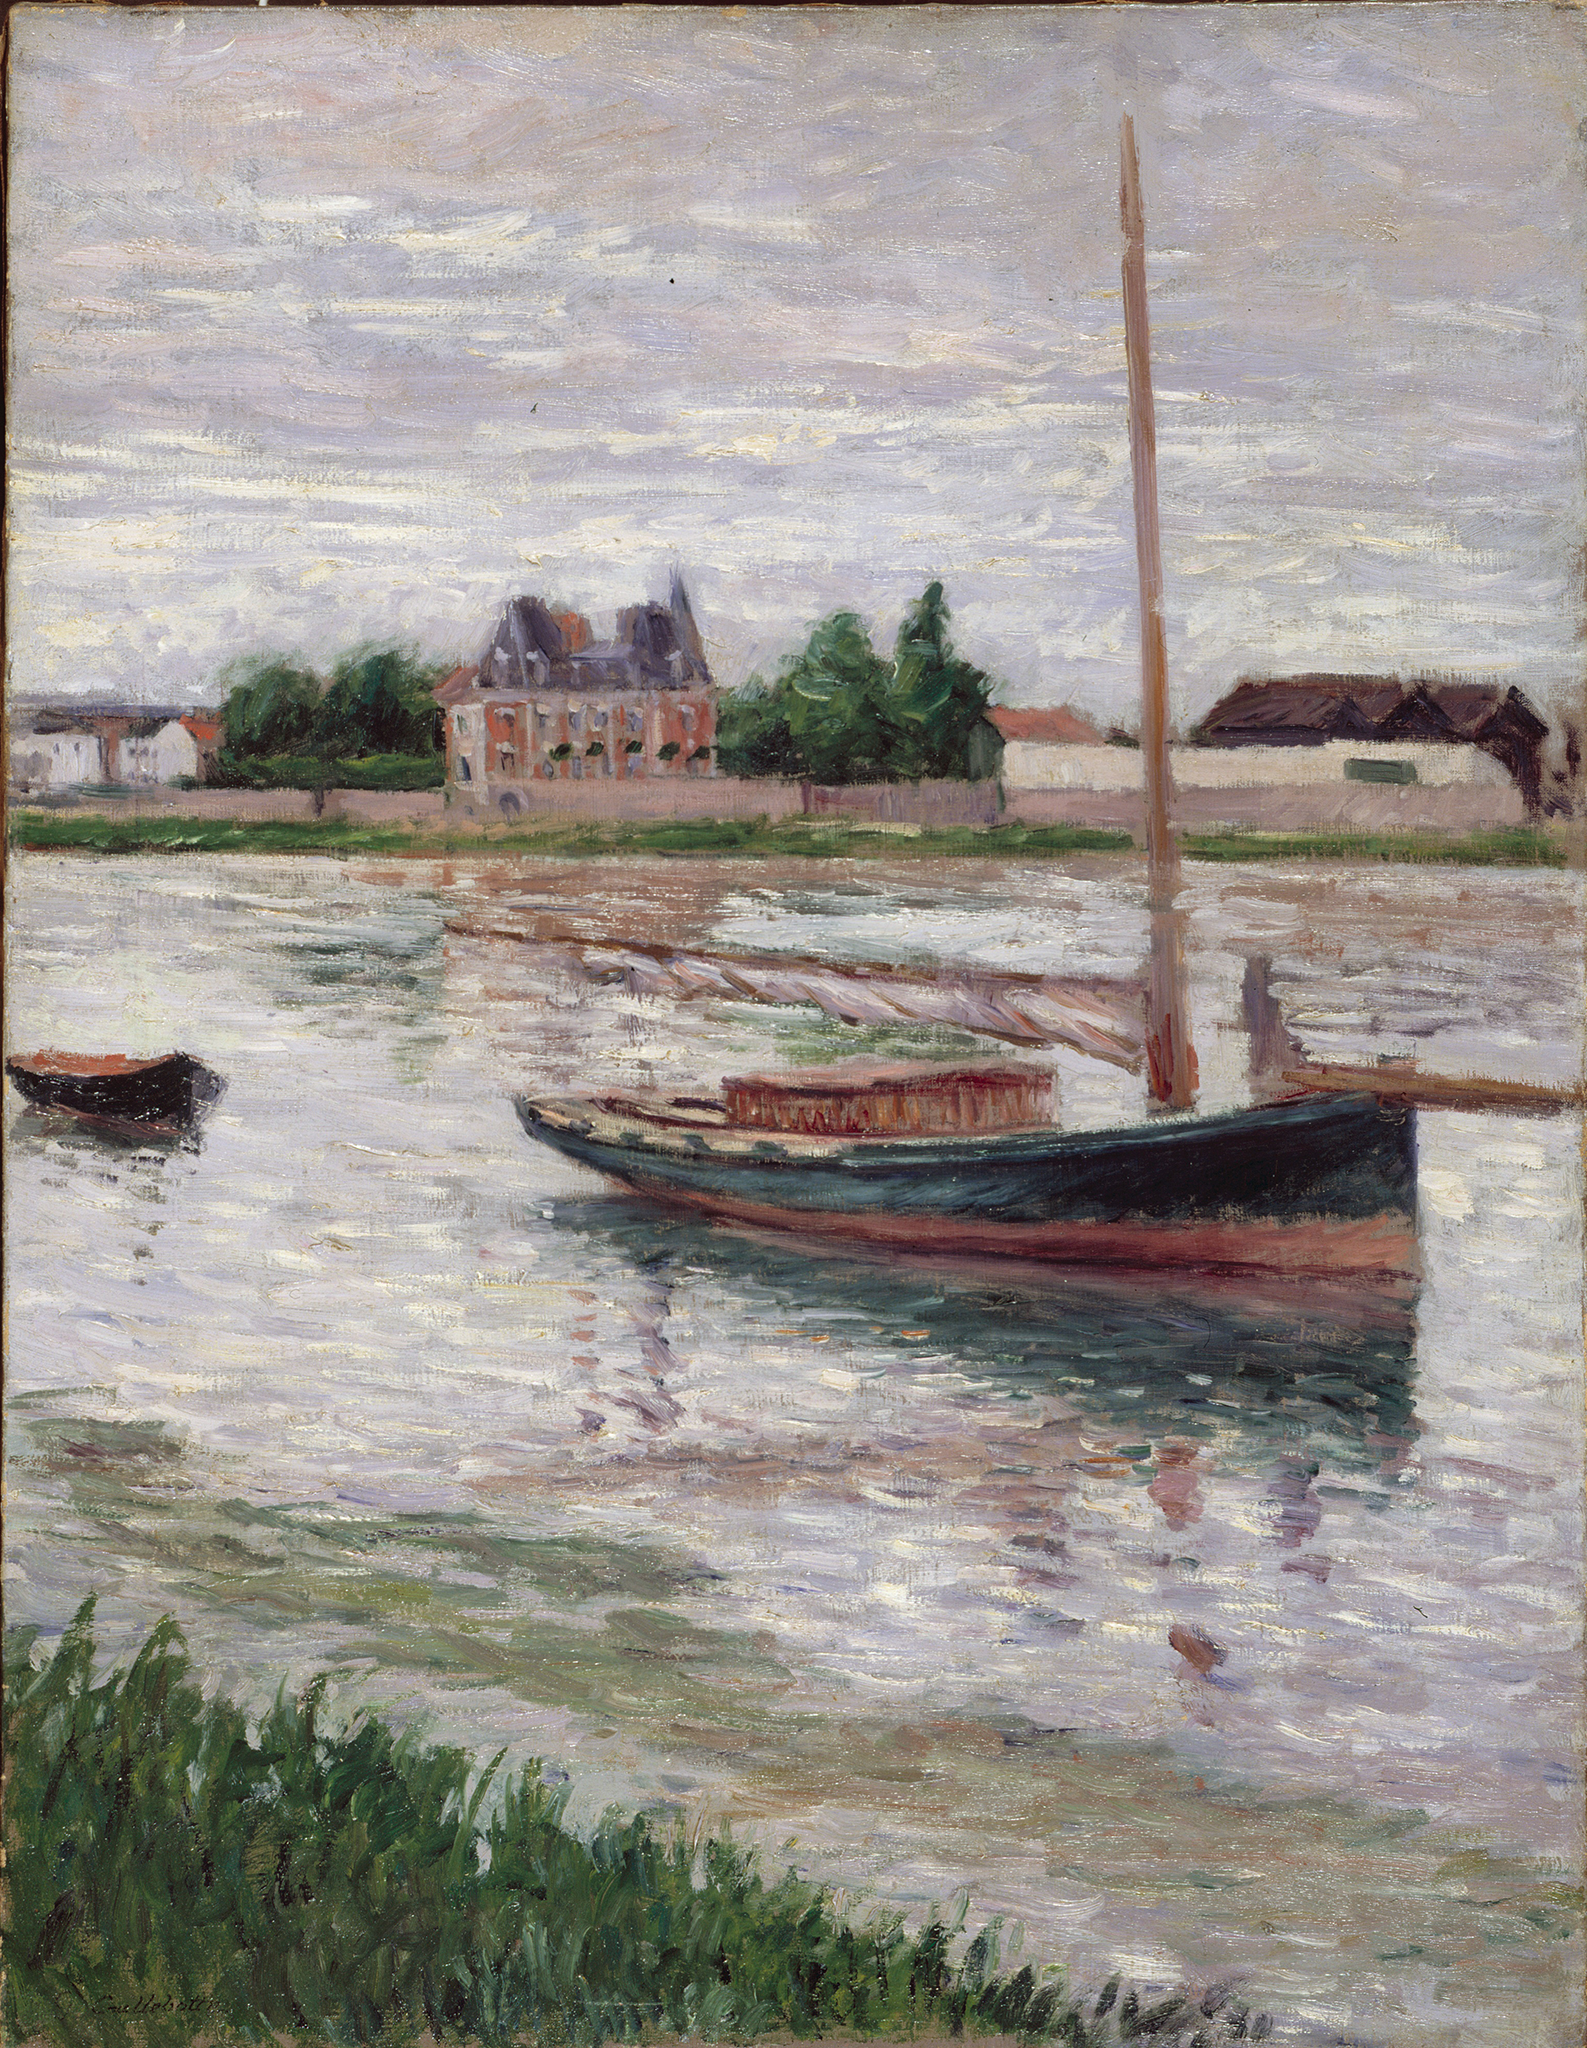 A painting depicting a wooden sailboat in a river. The sailboat has its main sail lowered. A smaller black wooden boat follows behind it. The water in the river reflects to boats and buildings near and around it. In the background there are buildings along the shoreline along with green trees. All of this lays under a cloudy gray sky. The painting is created with short and thick brushstrokes.